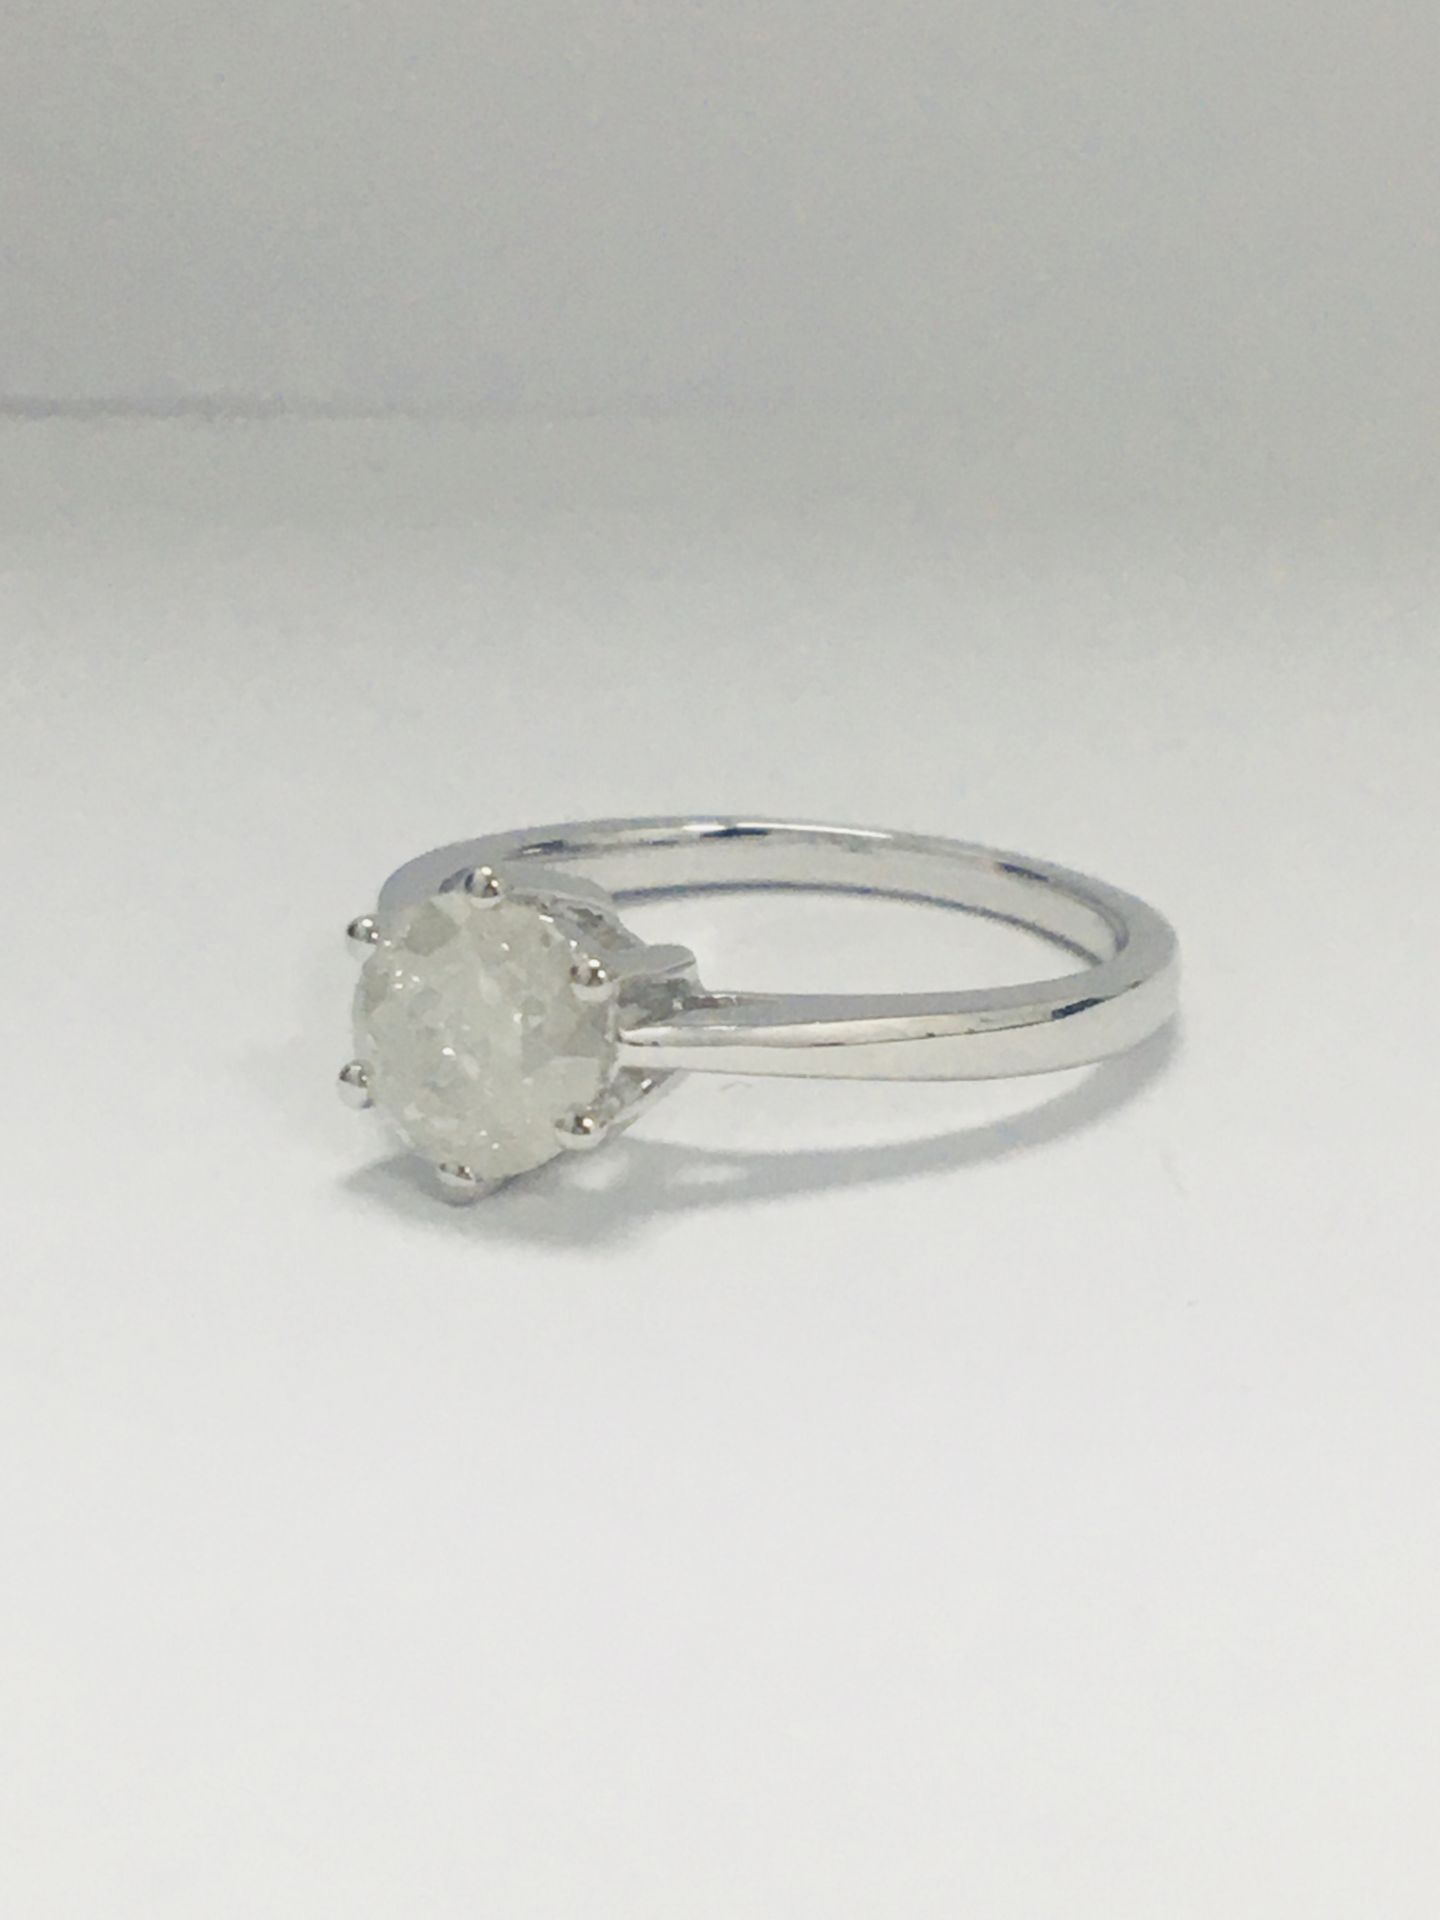 14Ct White Gold Diamond Solitaire Ring - Image 2 of 10